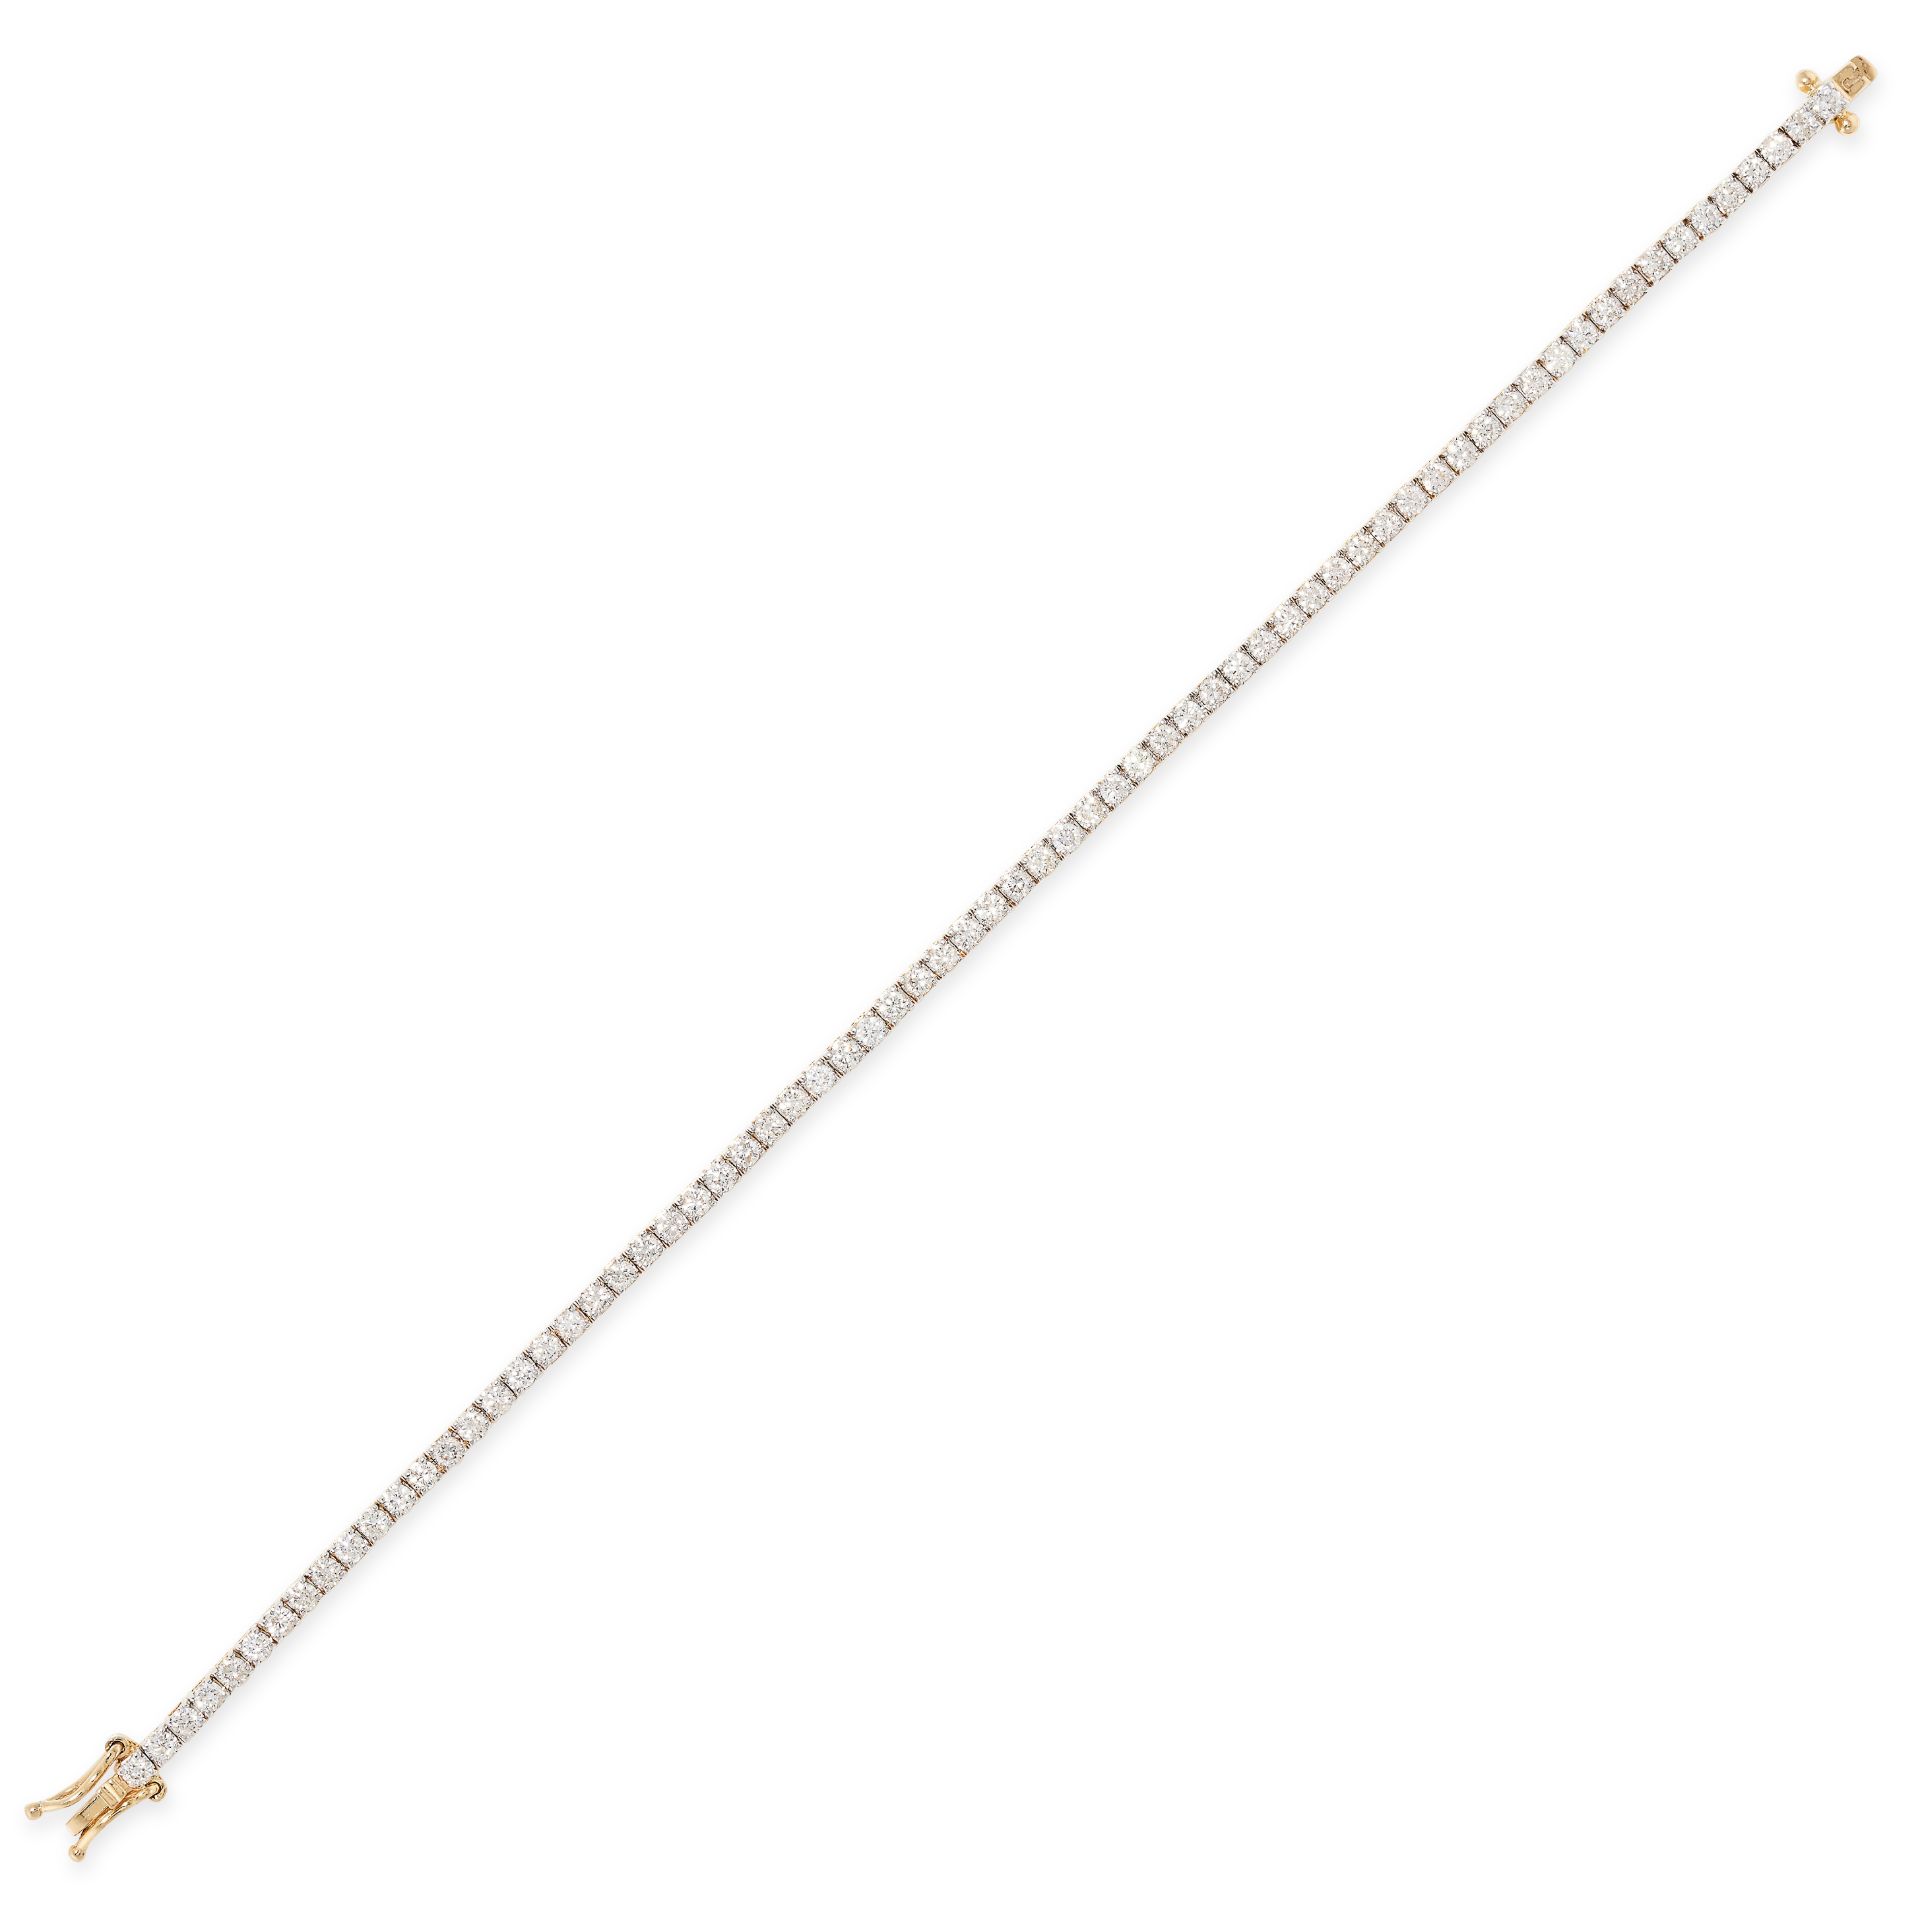 A DIAMOND LINE BRACELET in 18ct yellow gold, set with a single row of seventy round brilliant cut